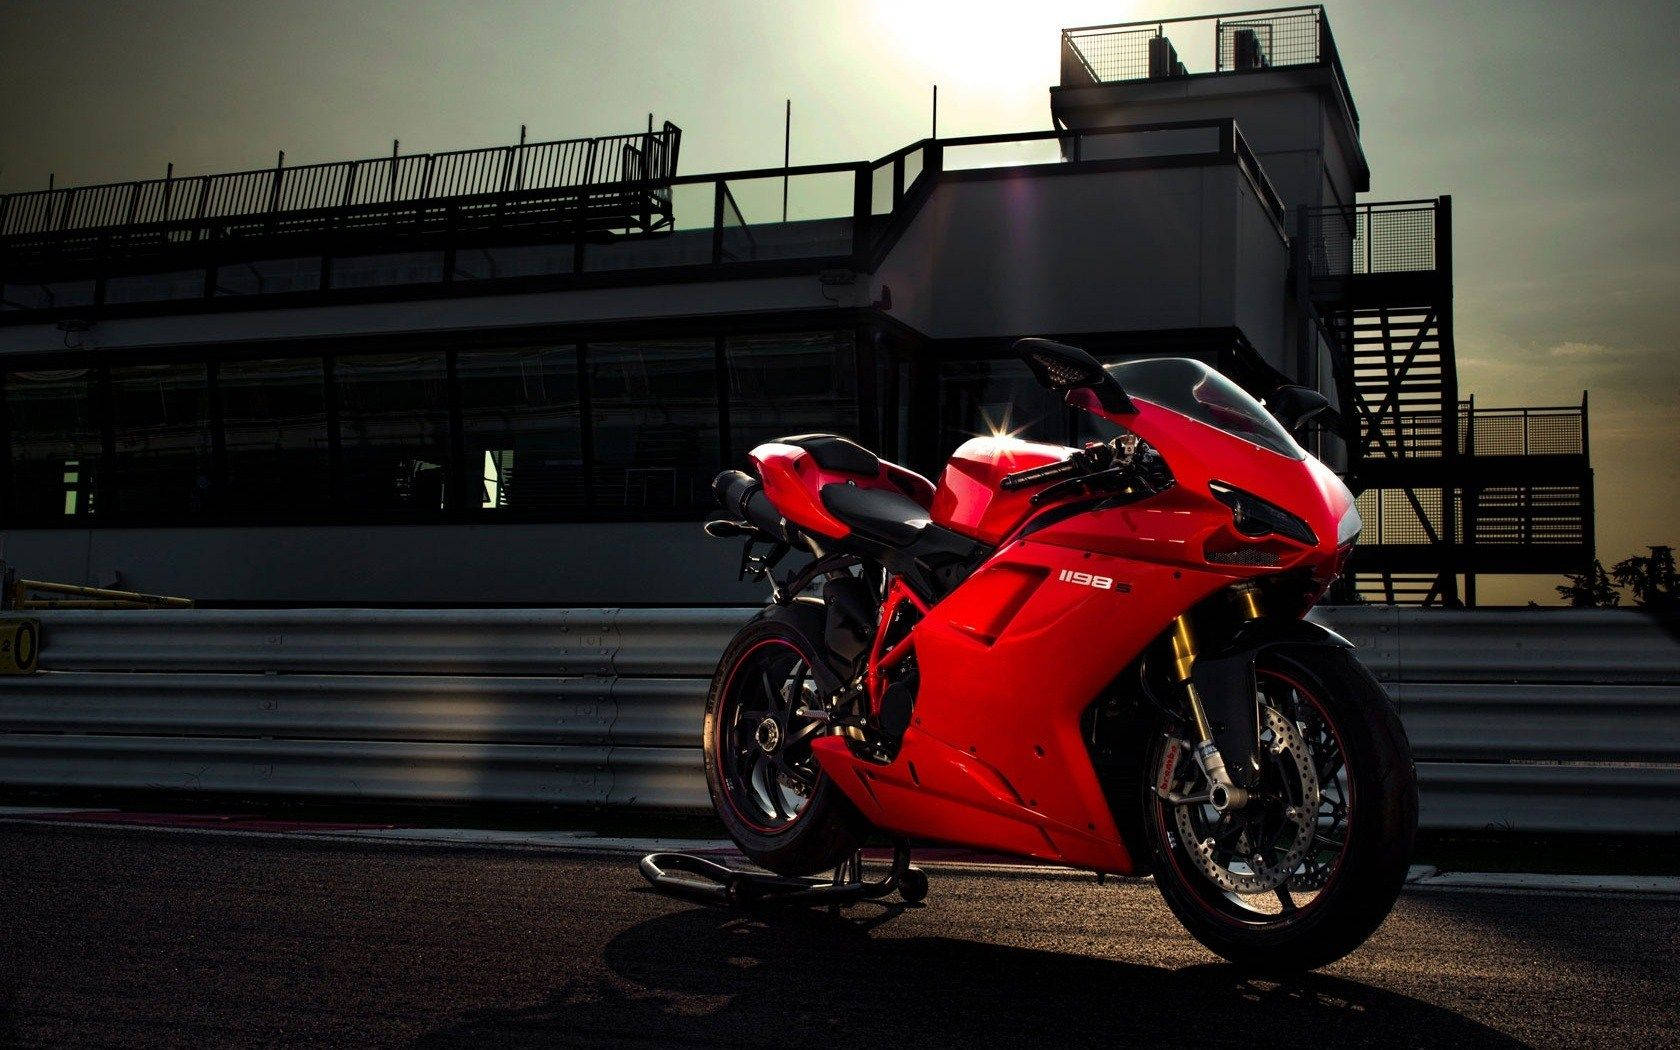 A Roaring Ducati 1198s Motorcycle On The Move Wallpaper